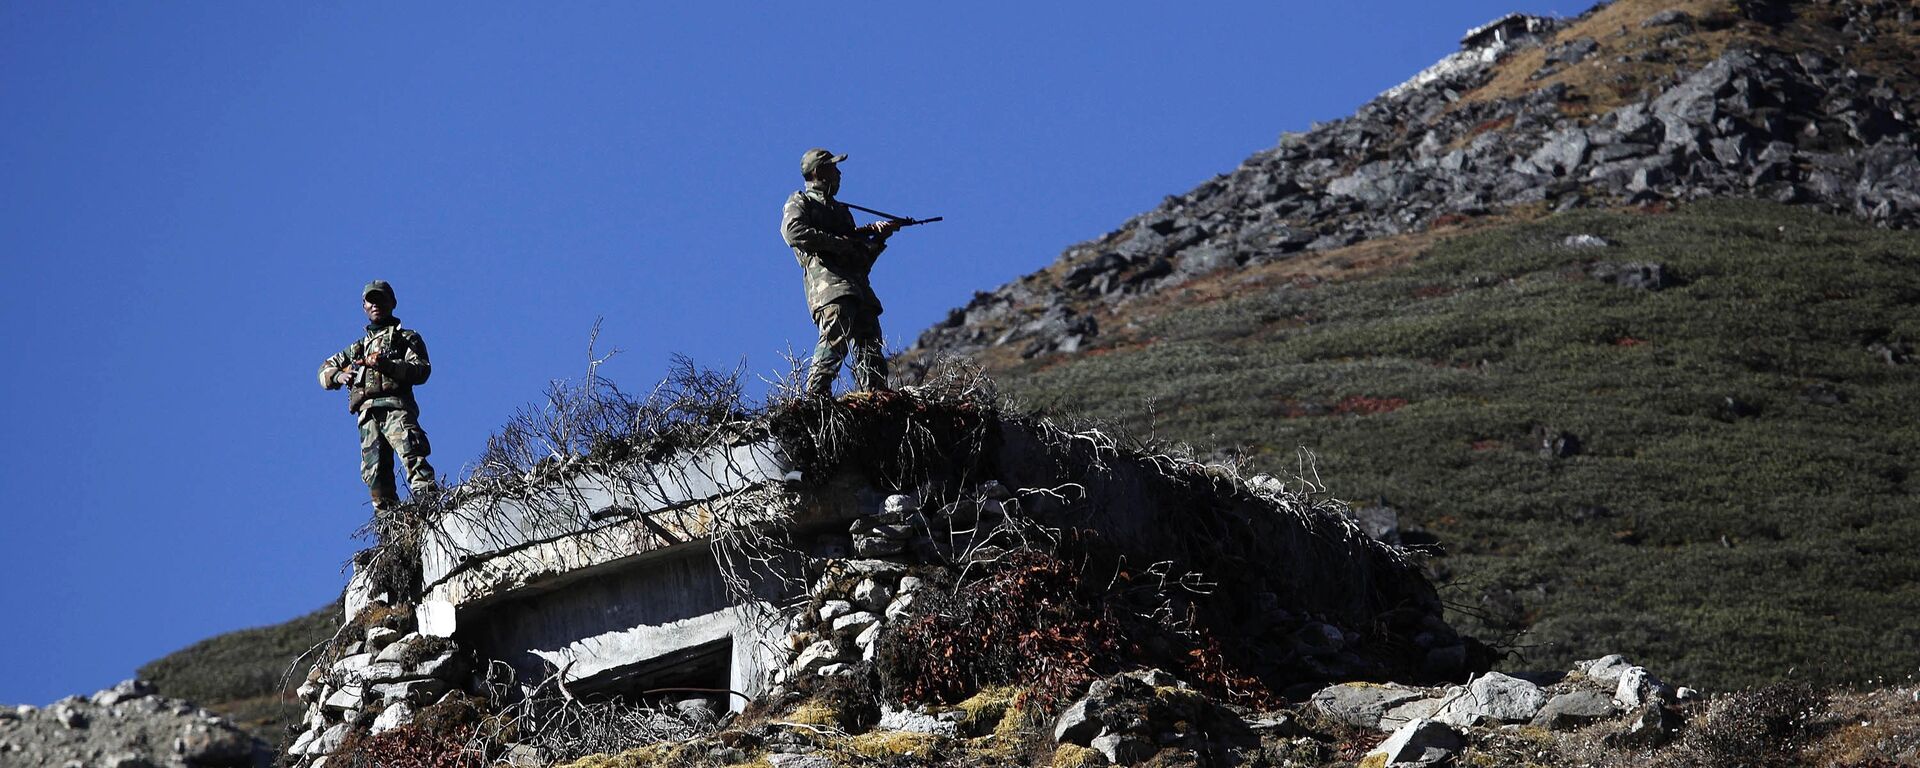 Indian army soldiers keep watch at the Indo China border in Bumla at an altitude of 15,700 feet (4,700 meters) above sea level in Arunachal Pradesh, India. (File) - Sputnik International, 1920, 03.01.2019